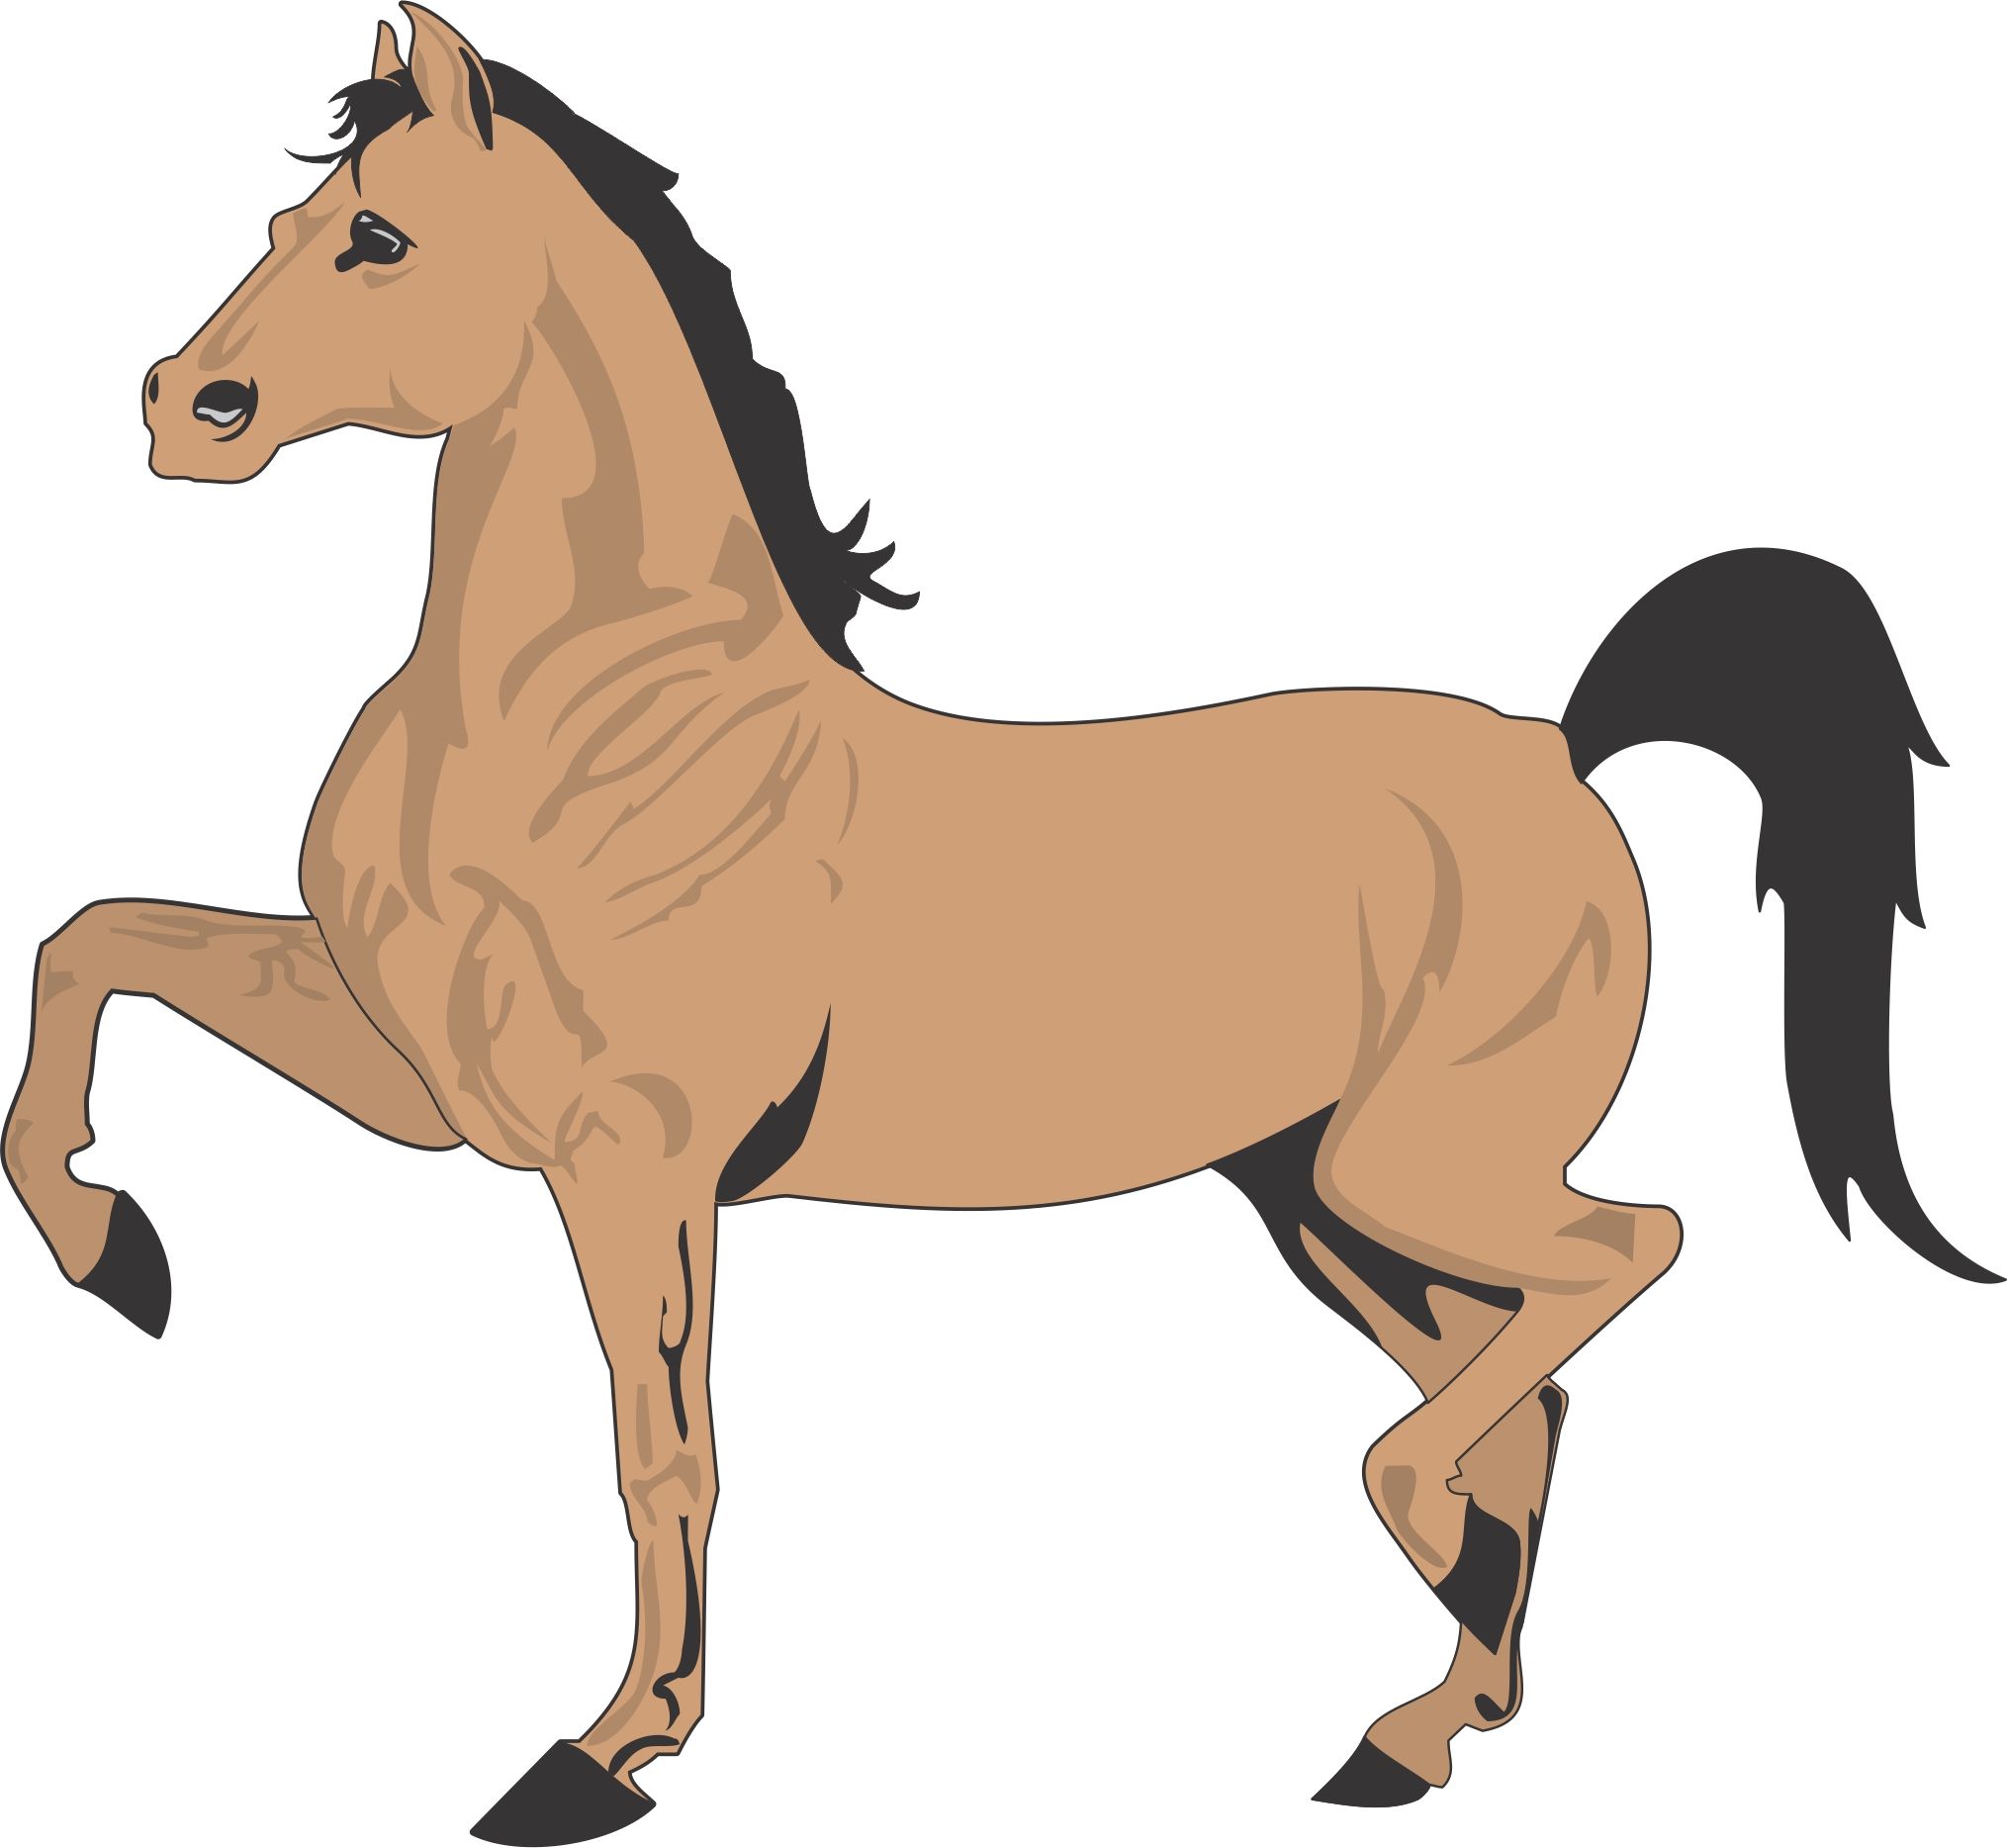 Free CARTOON IMAGES OF HORSE, Download Free Clip Art, Free Clip